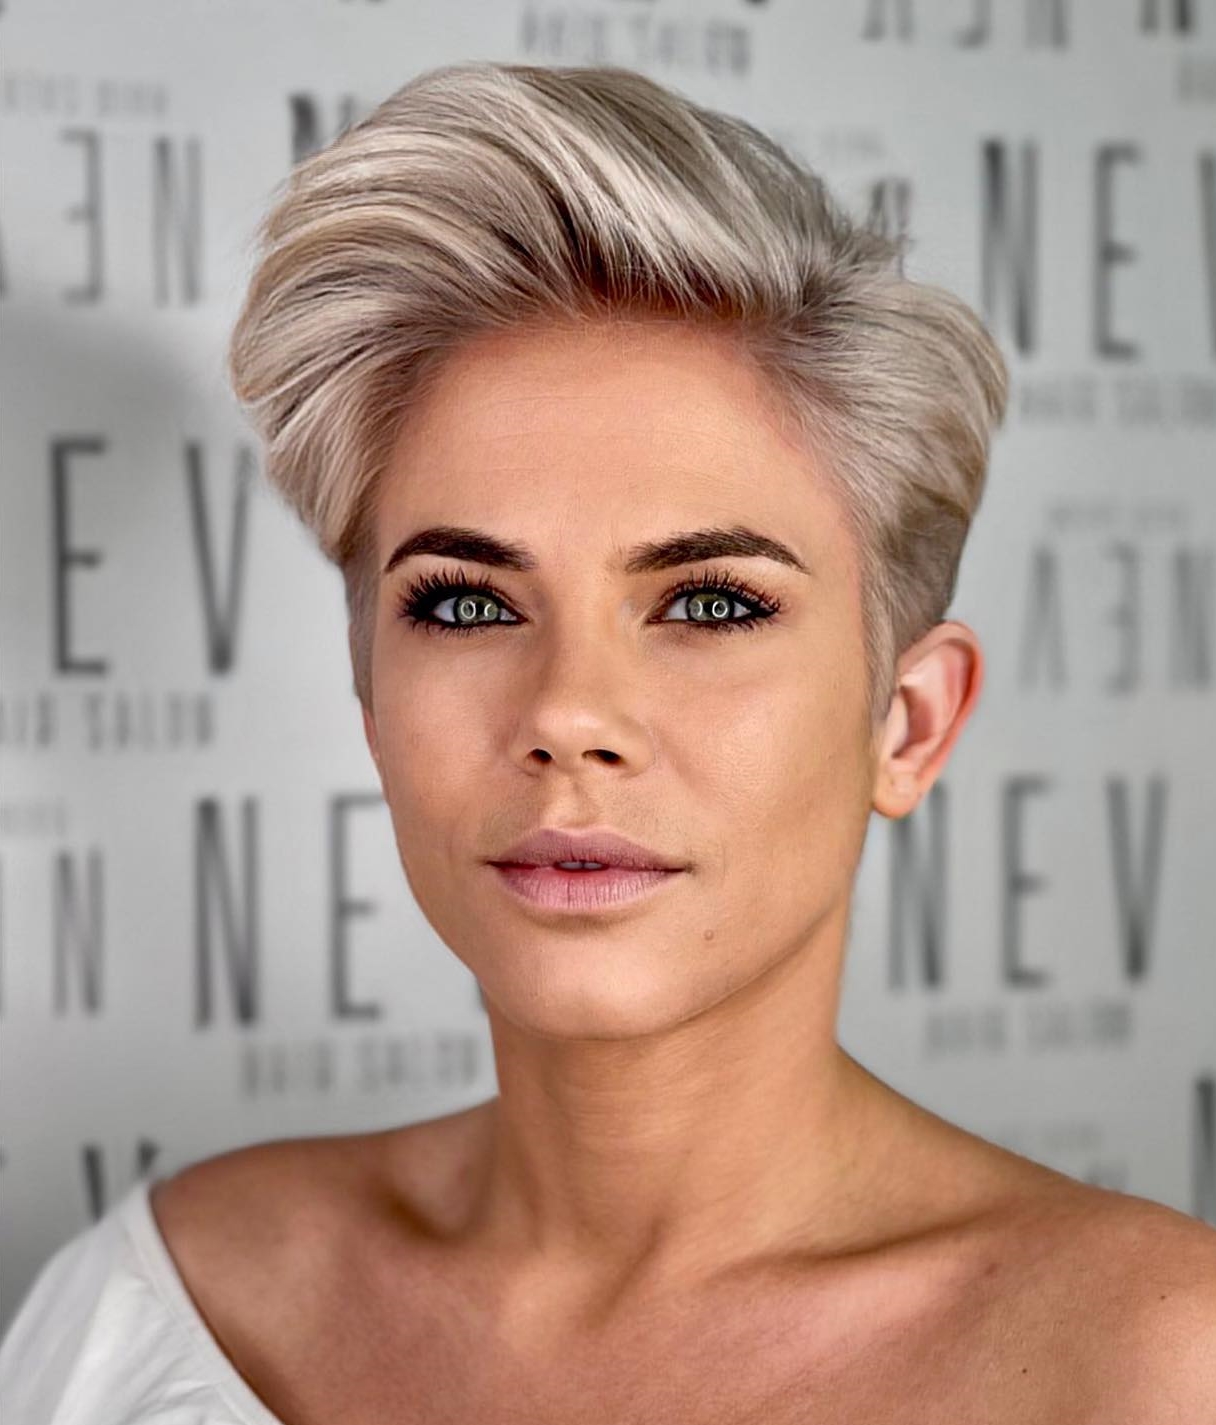 22 Exclusive Ideas to Style a Pixie Haircut